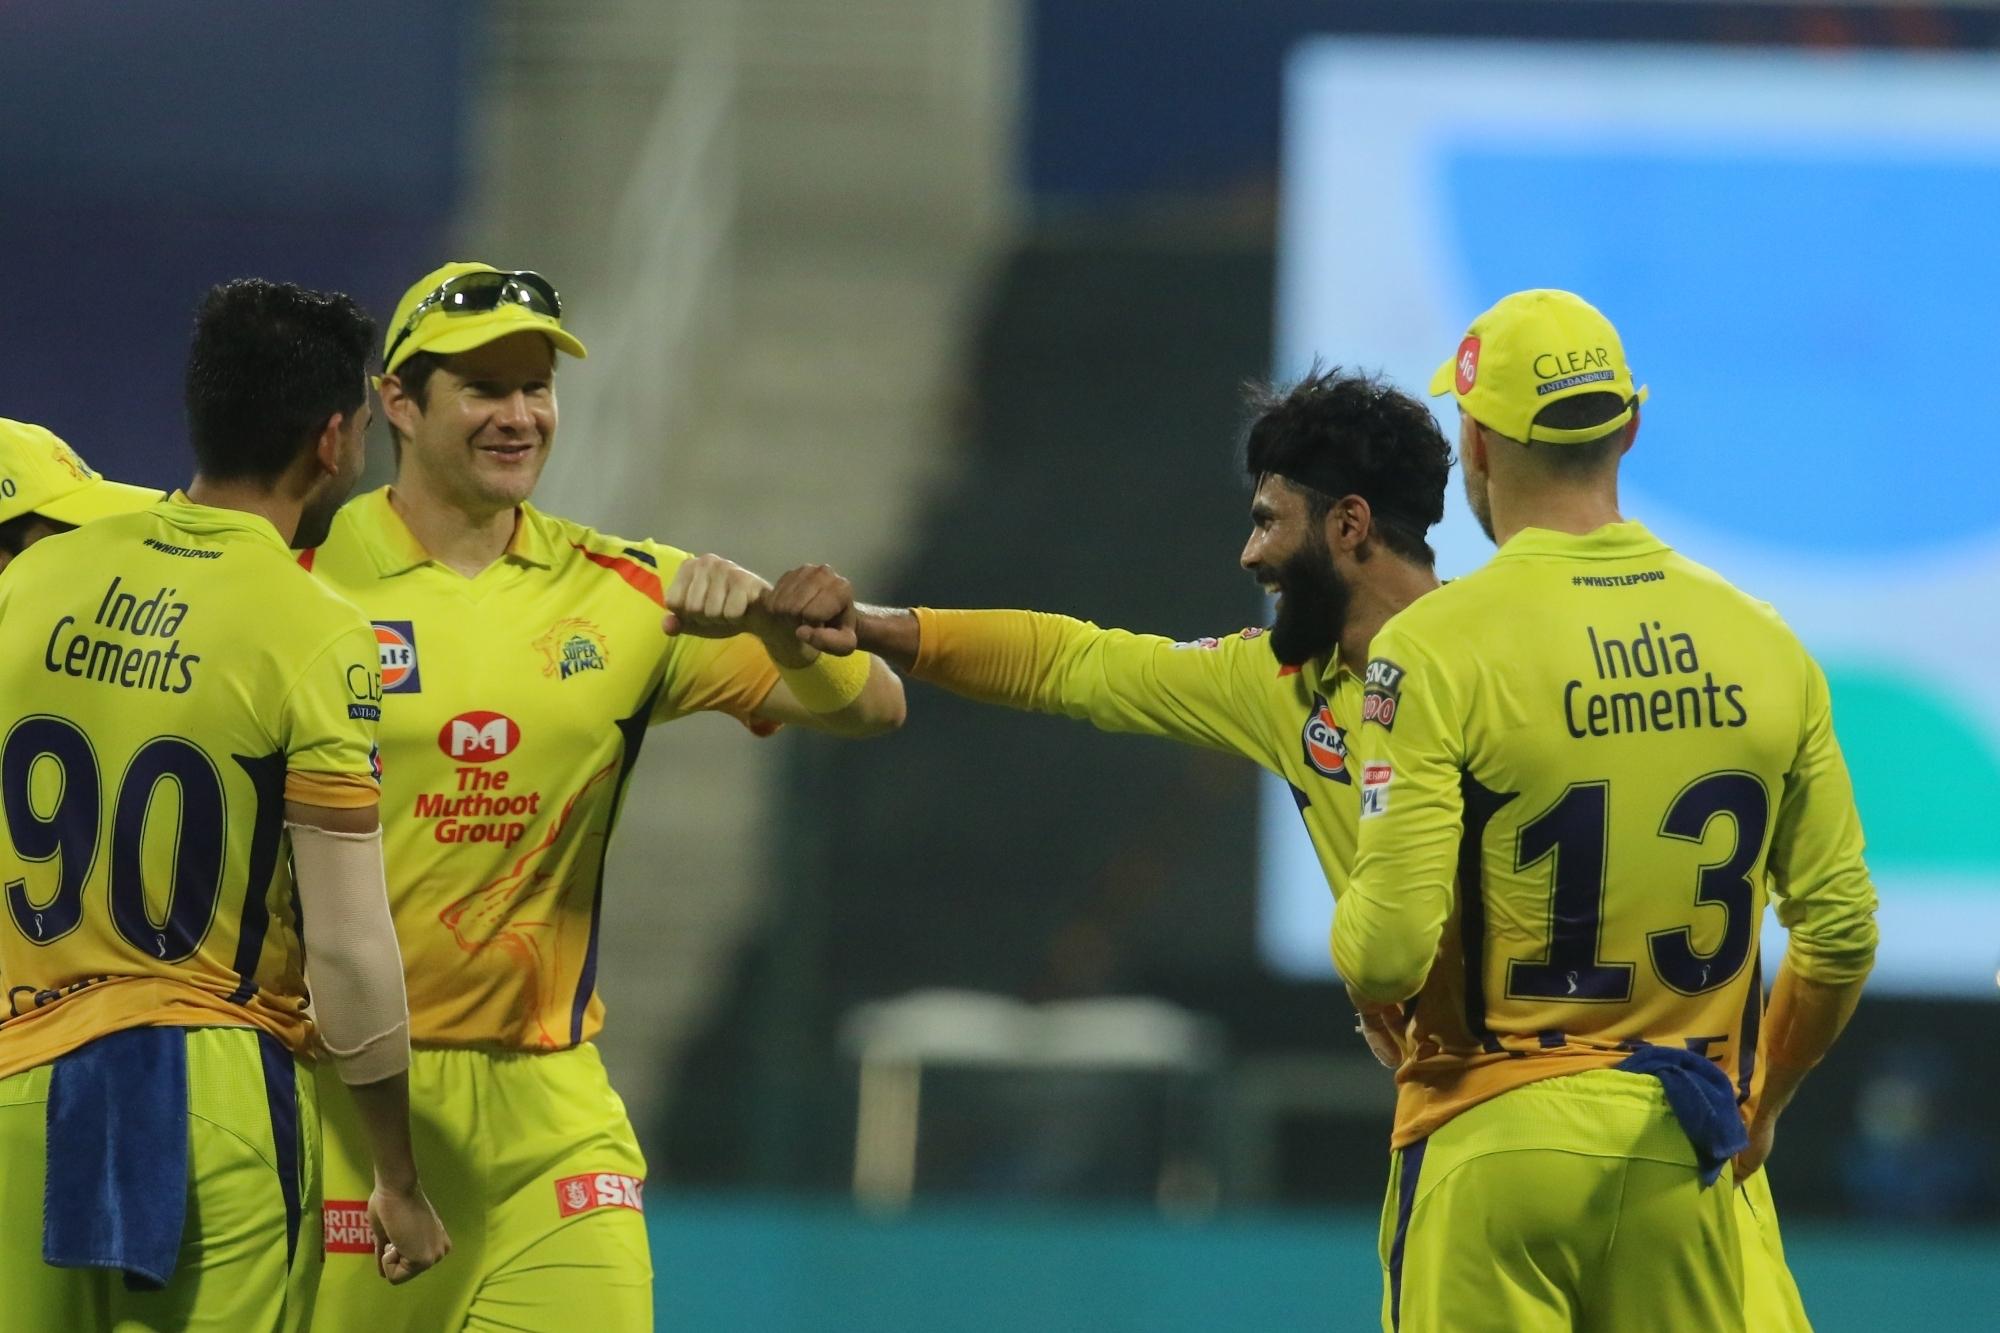 CSK will be happy to get another win in their pocket | IANS